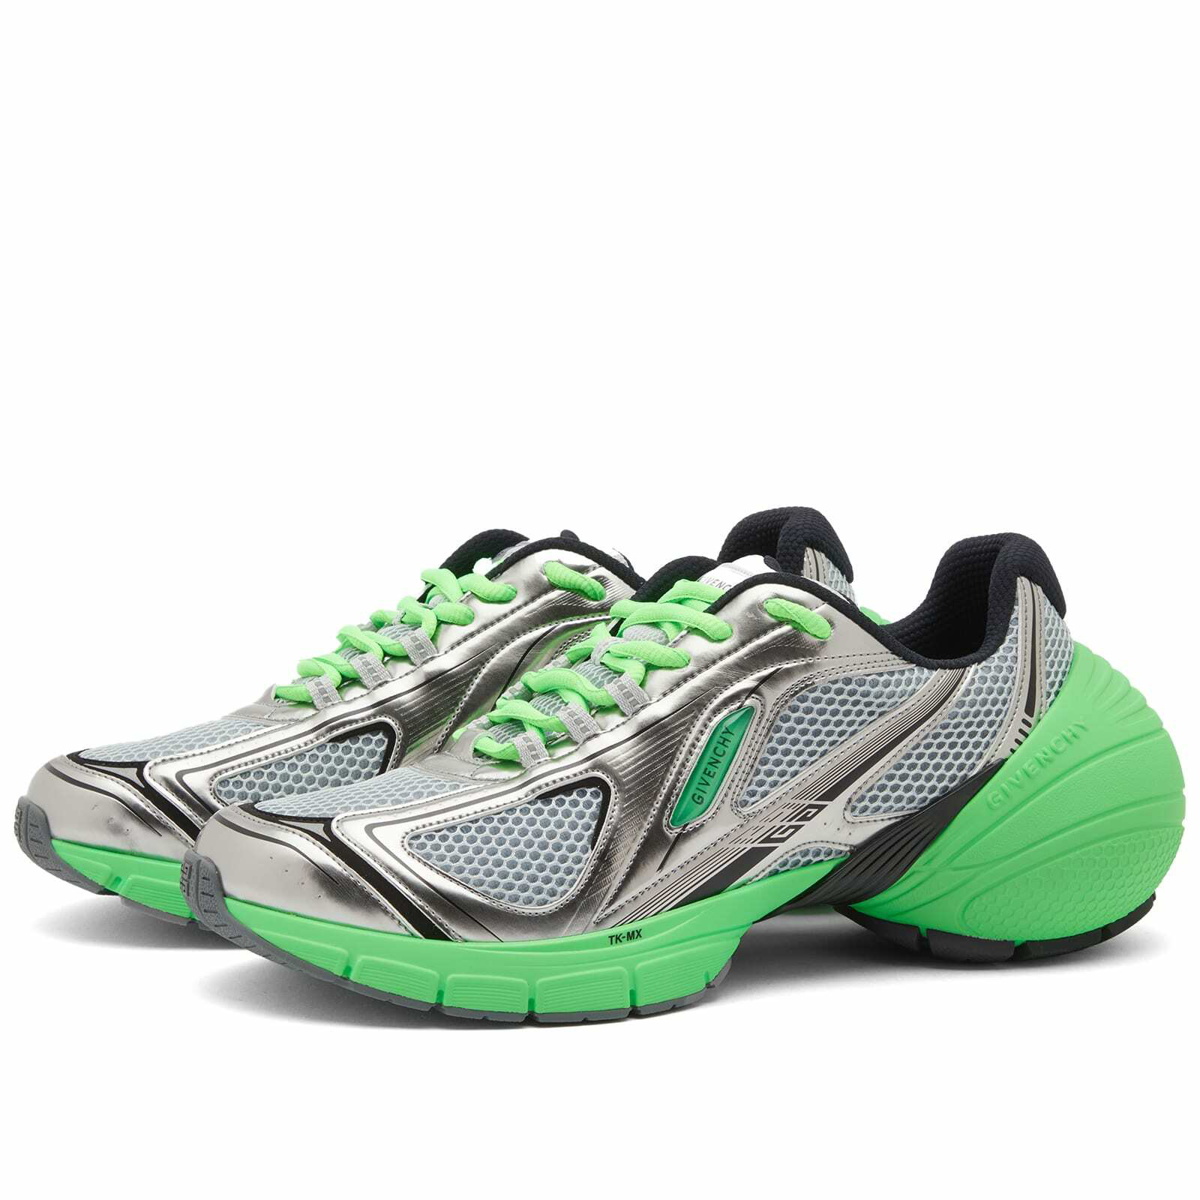 Givenchy Men's TK-MX Runner Sneakers in Green/Silvery Givenchy